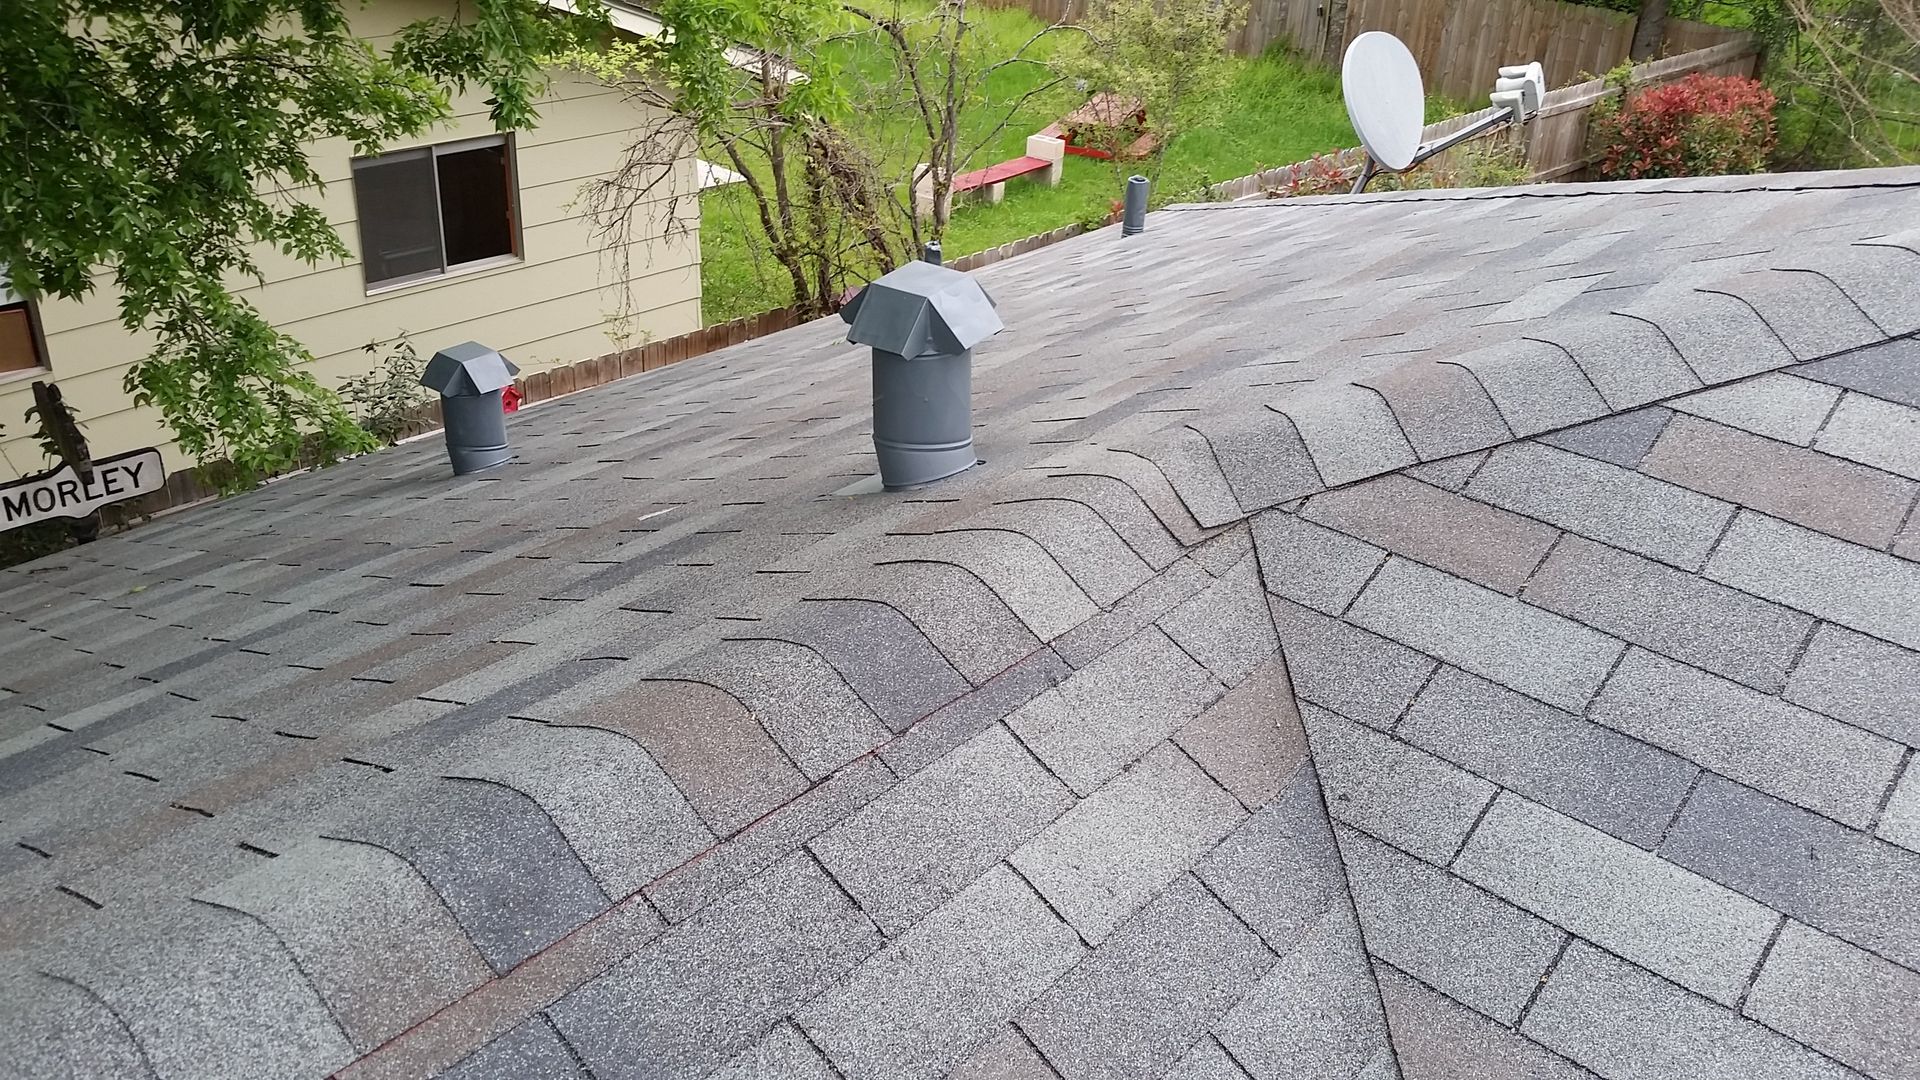 GAF 3 tab 25 year Royal Sovereign shingles Color Slate - Austin Roofing and Construction